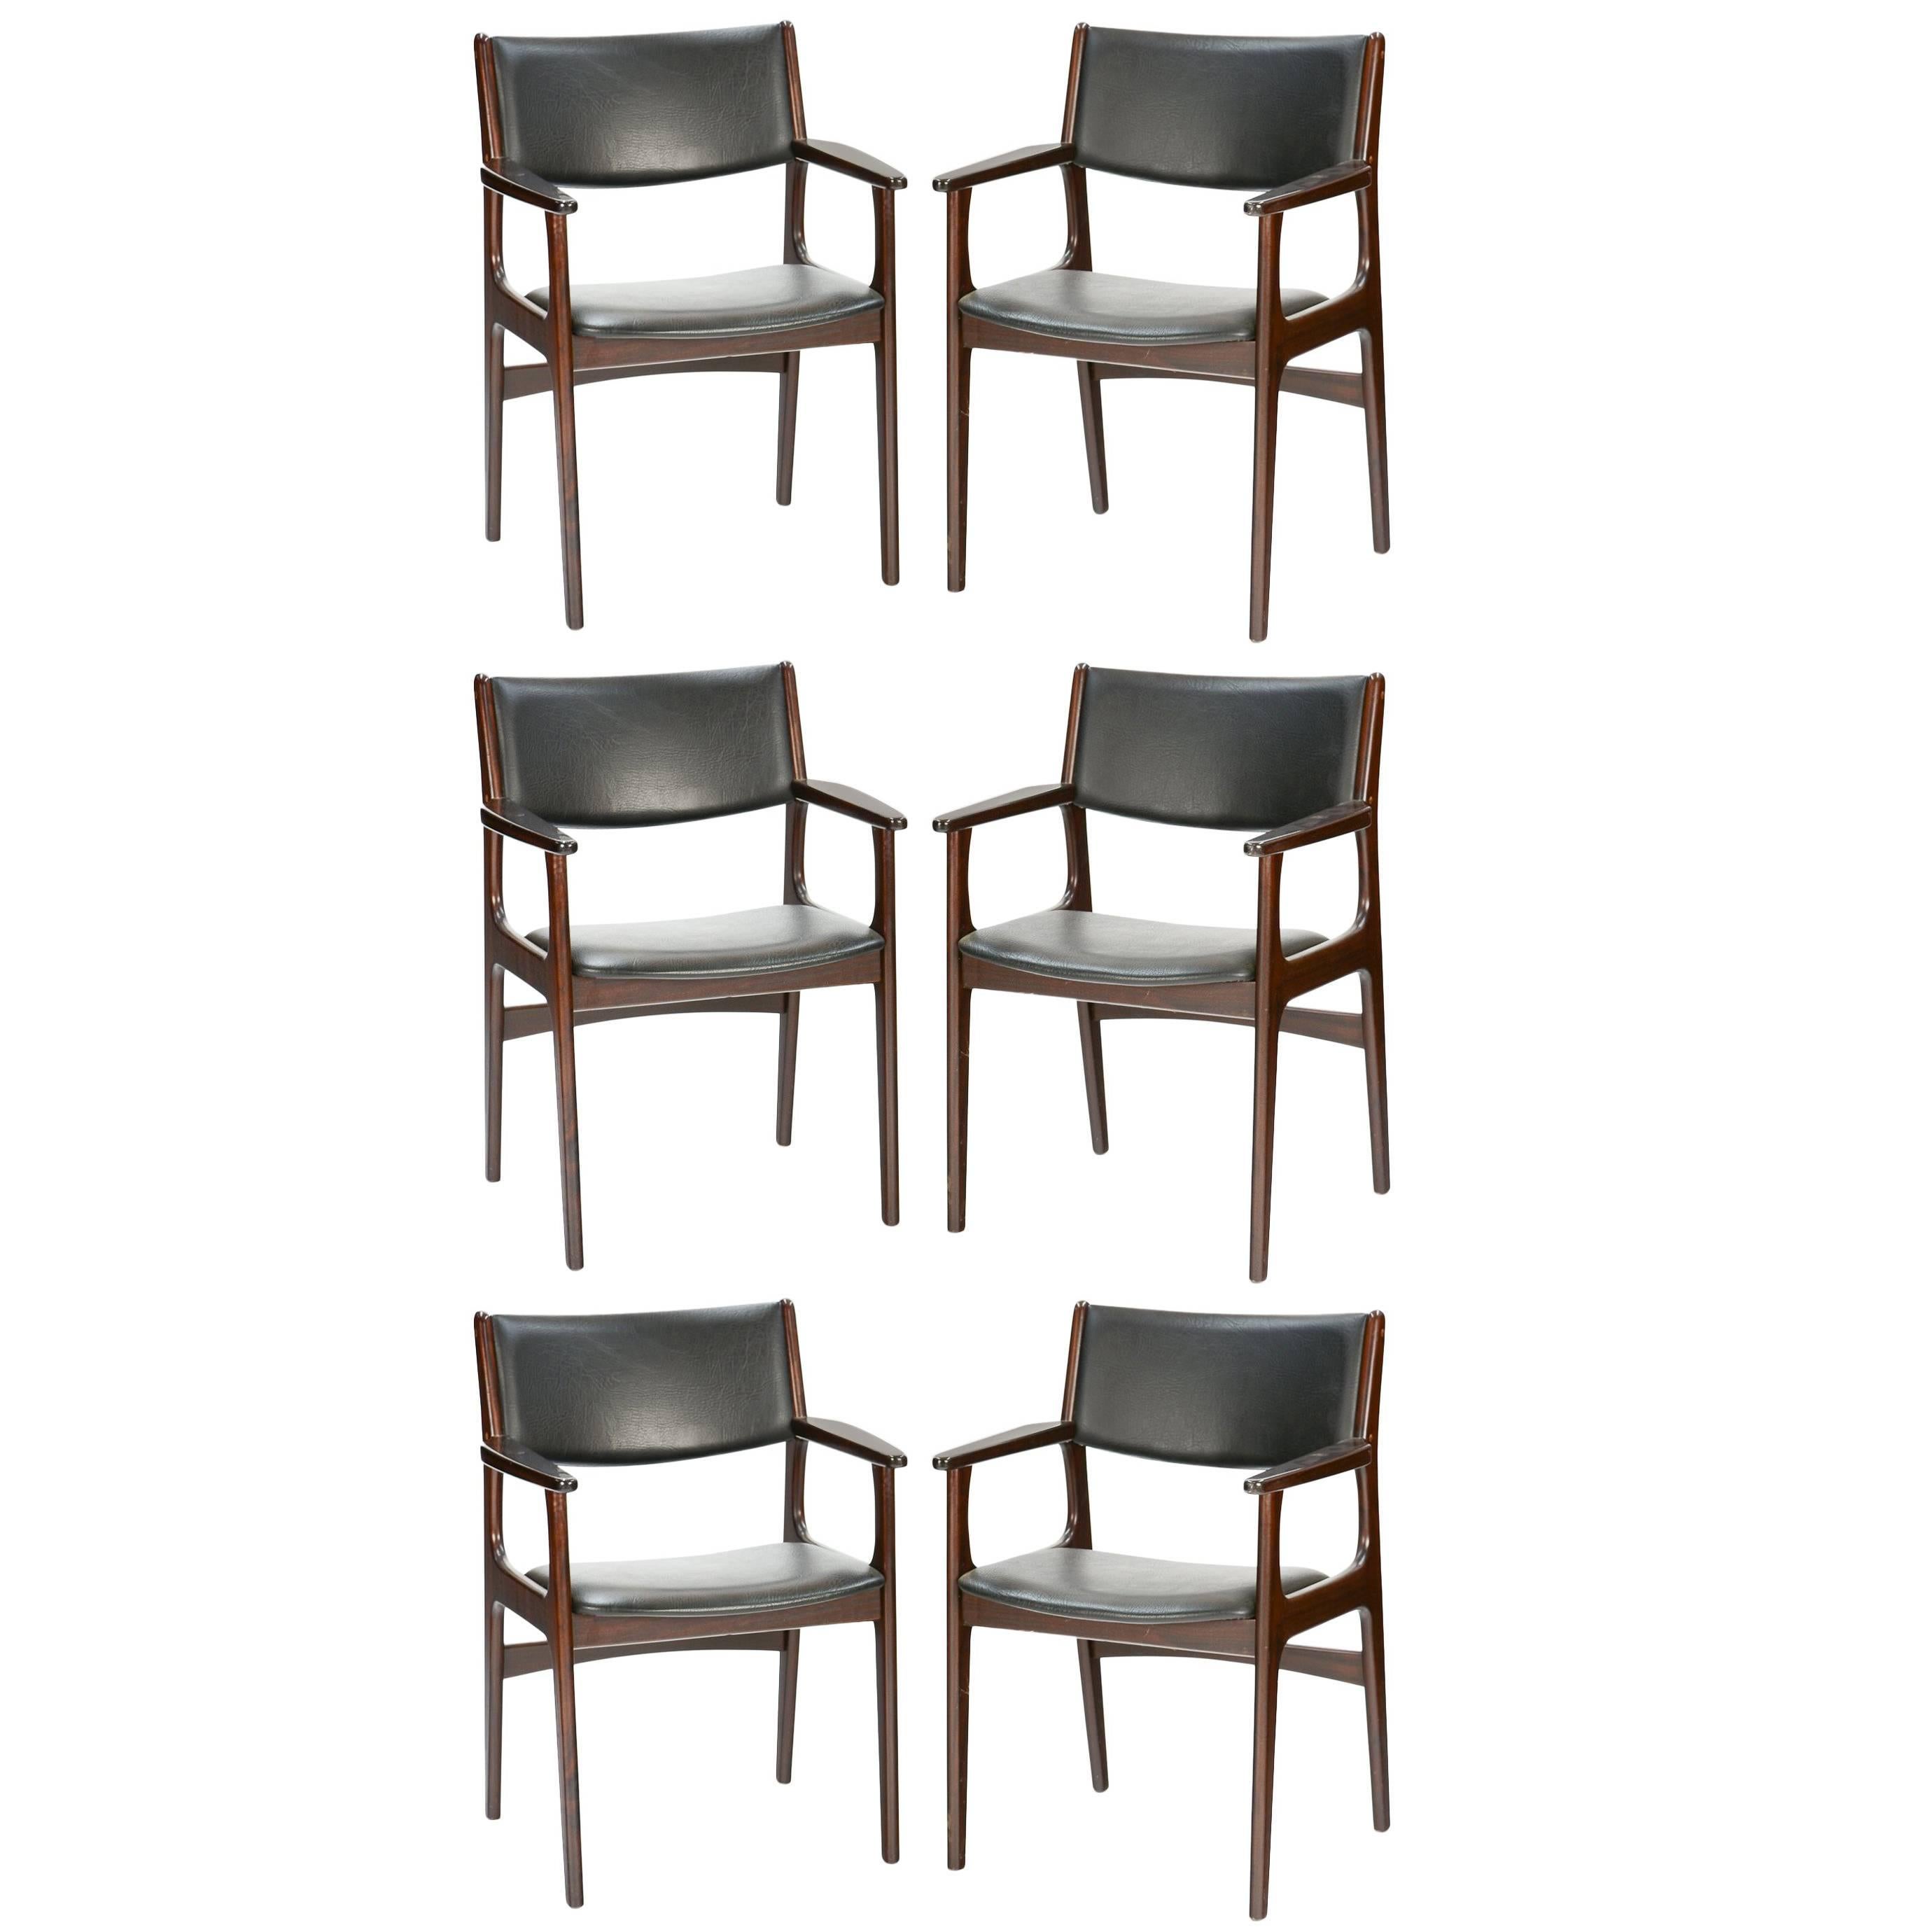  A Set of 6 Armchairs by Rosewood Designer Erik Buch for Orum Mobler